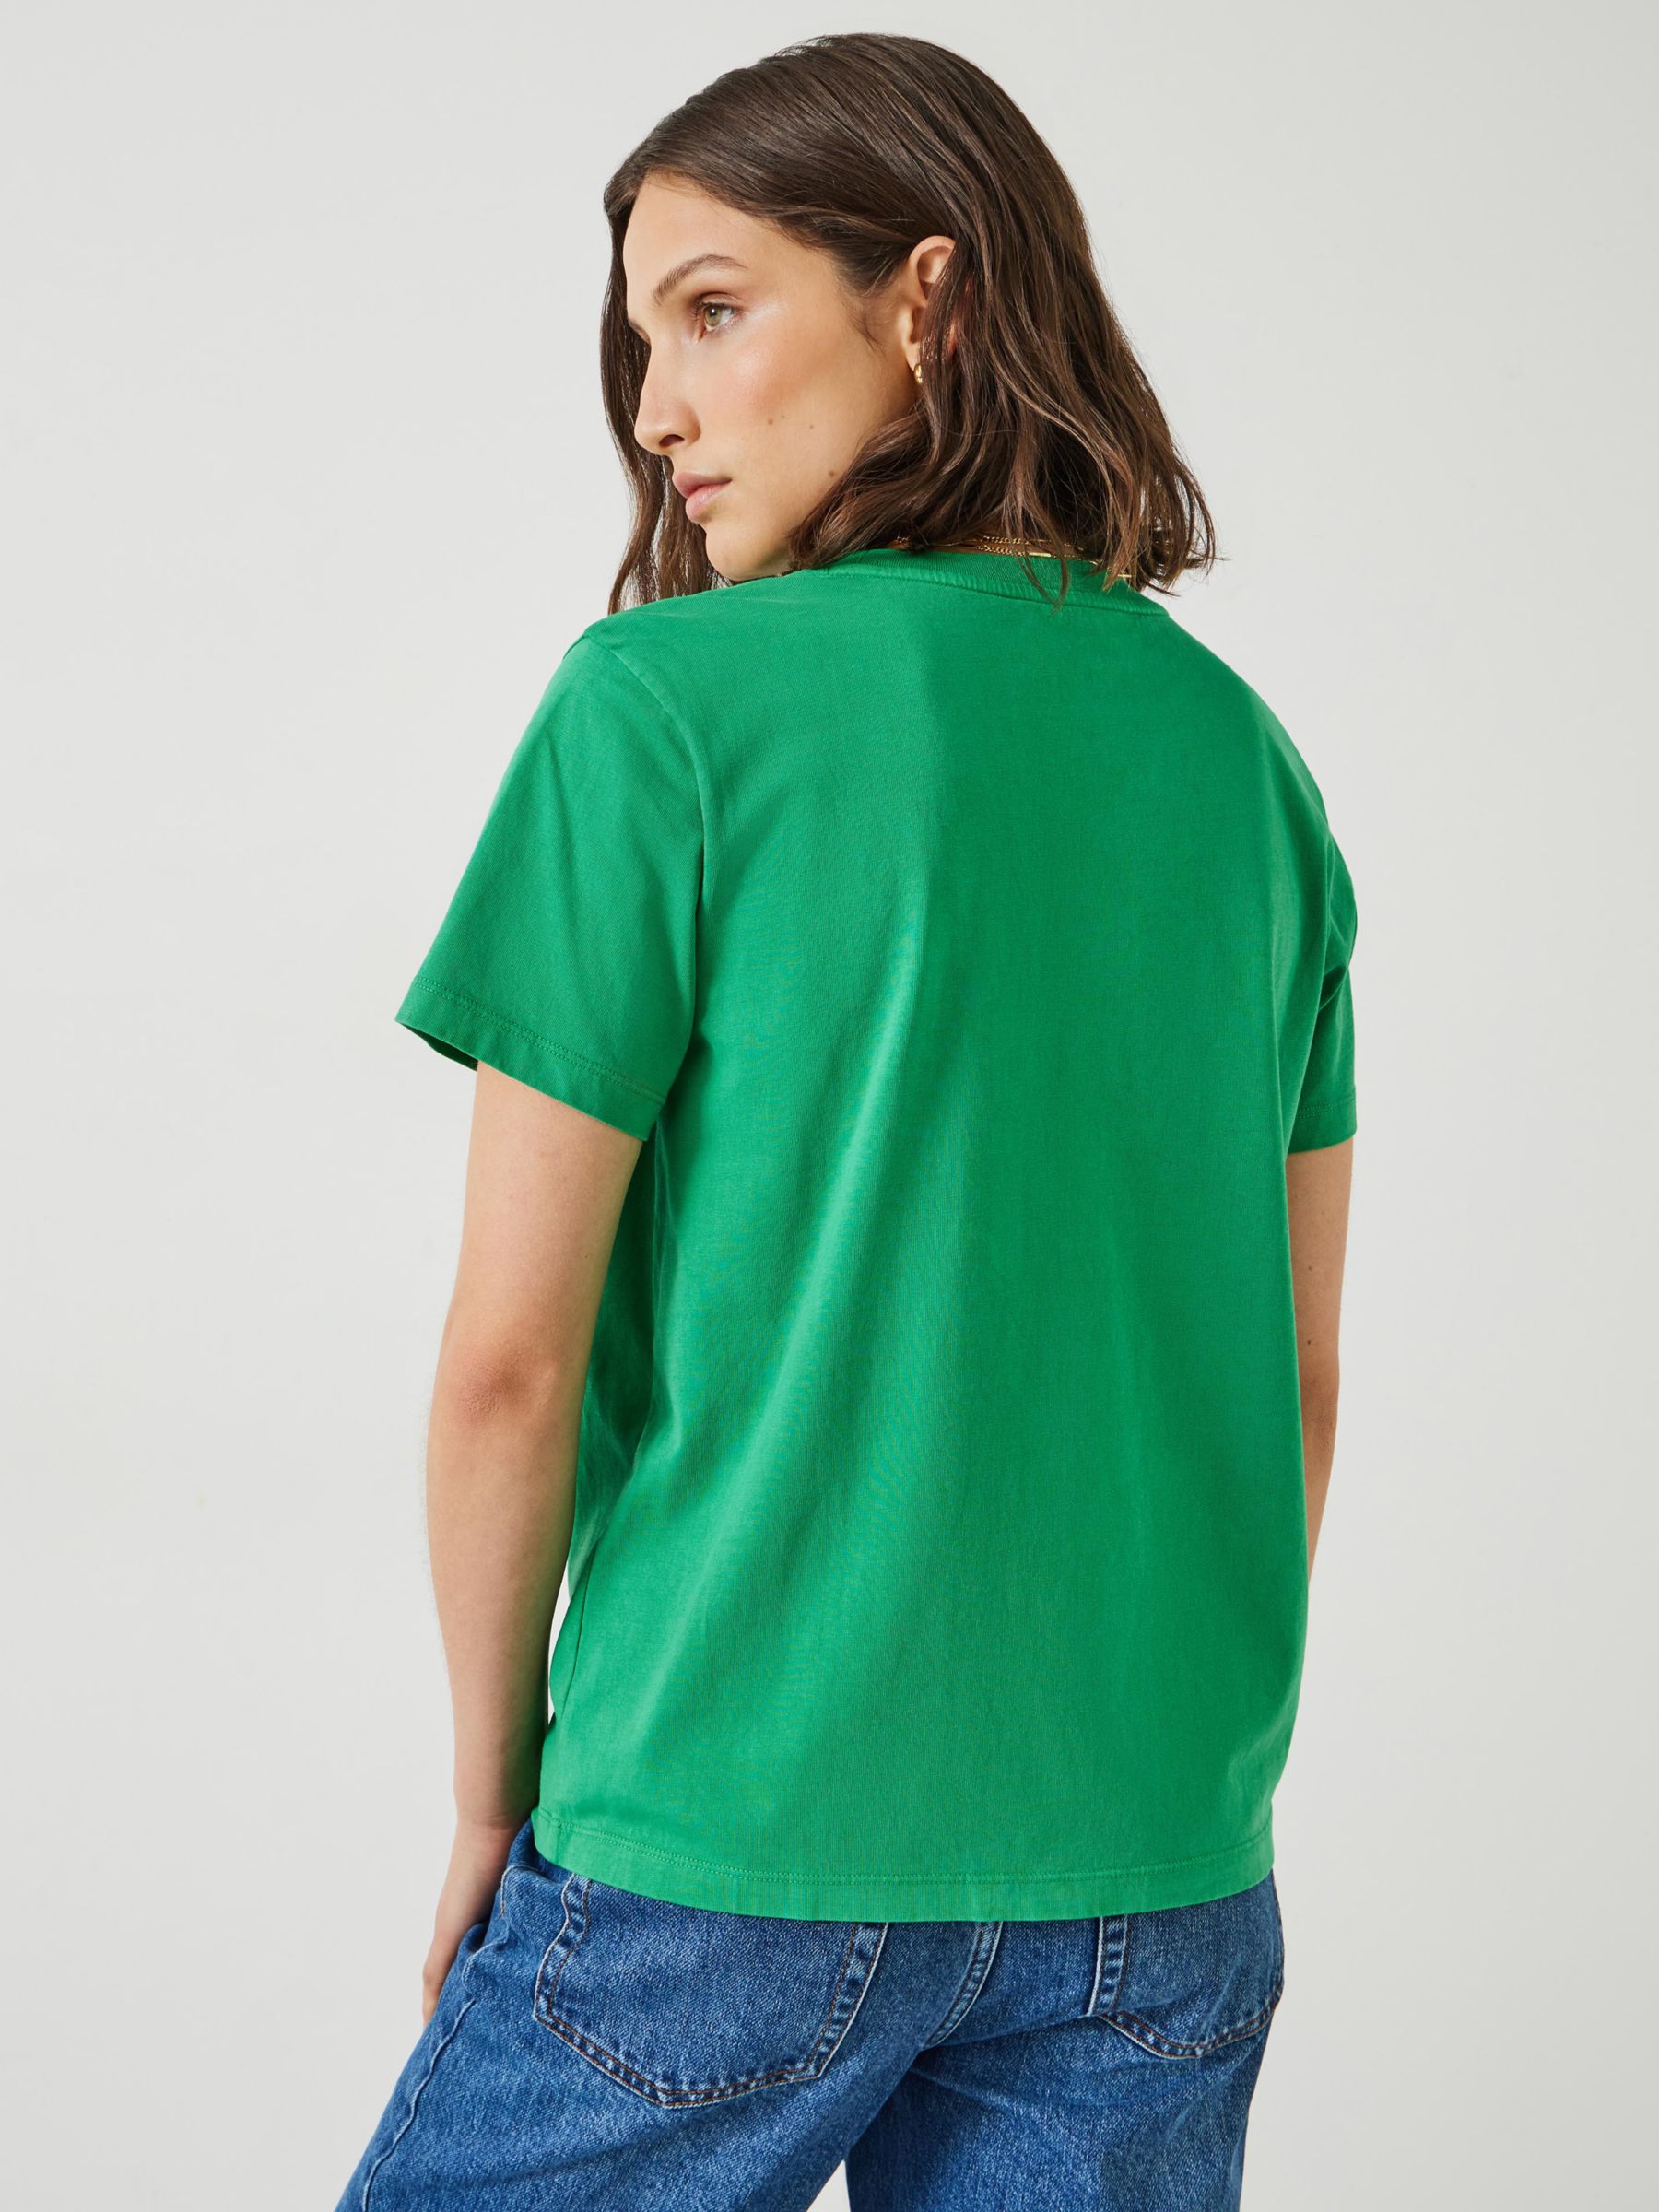 Buy HUSH French Exit Cotton T-Shirt, Green Online at johnlewis.com